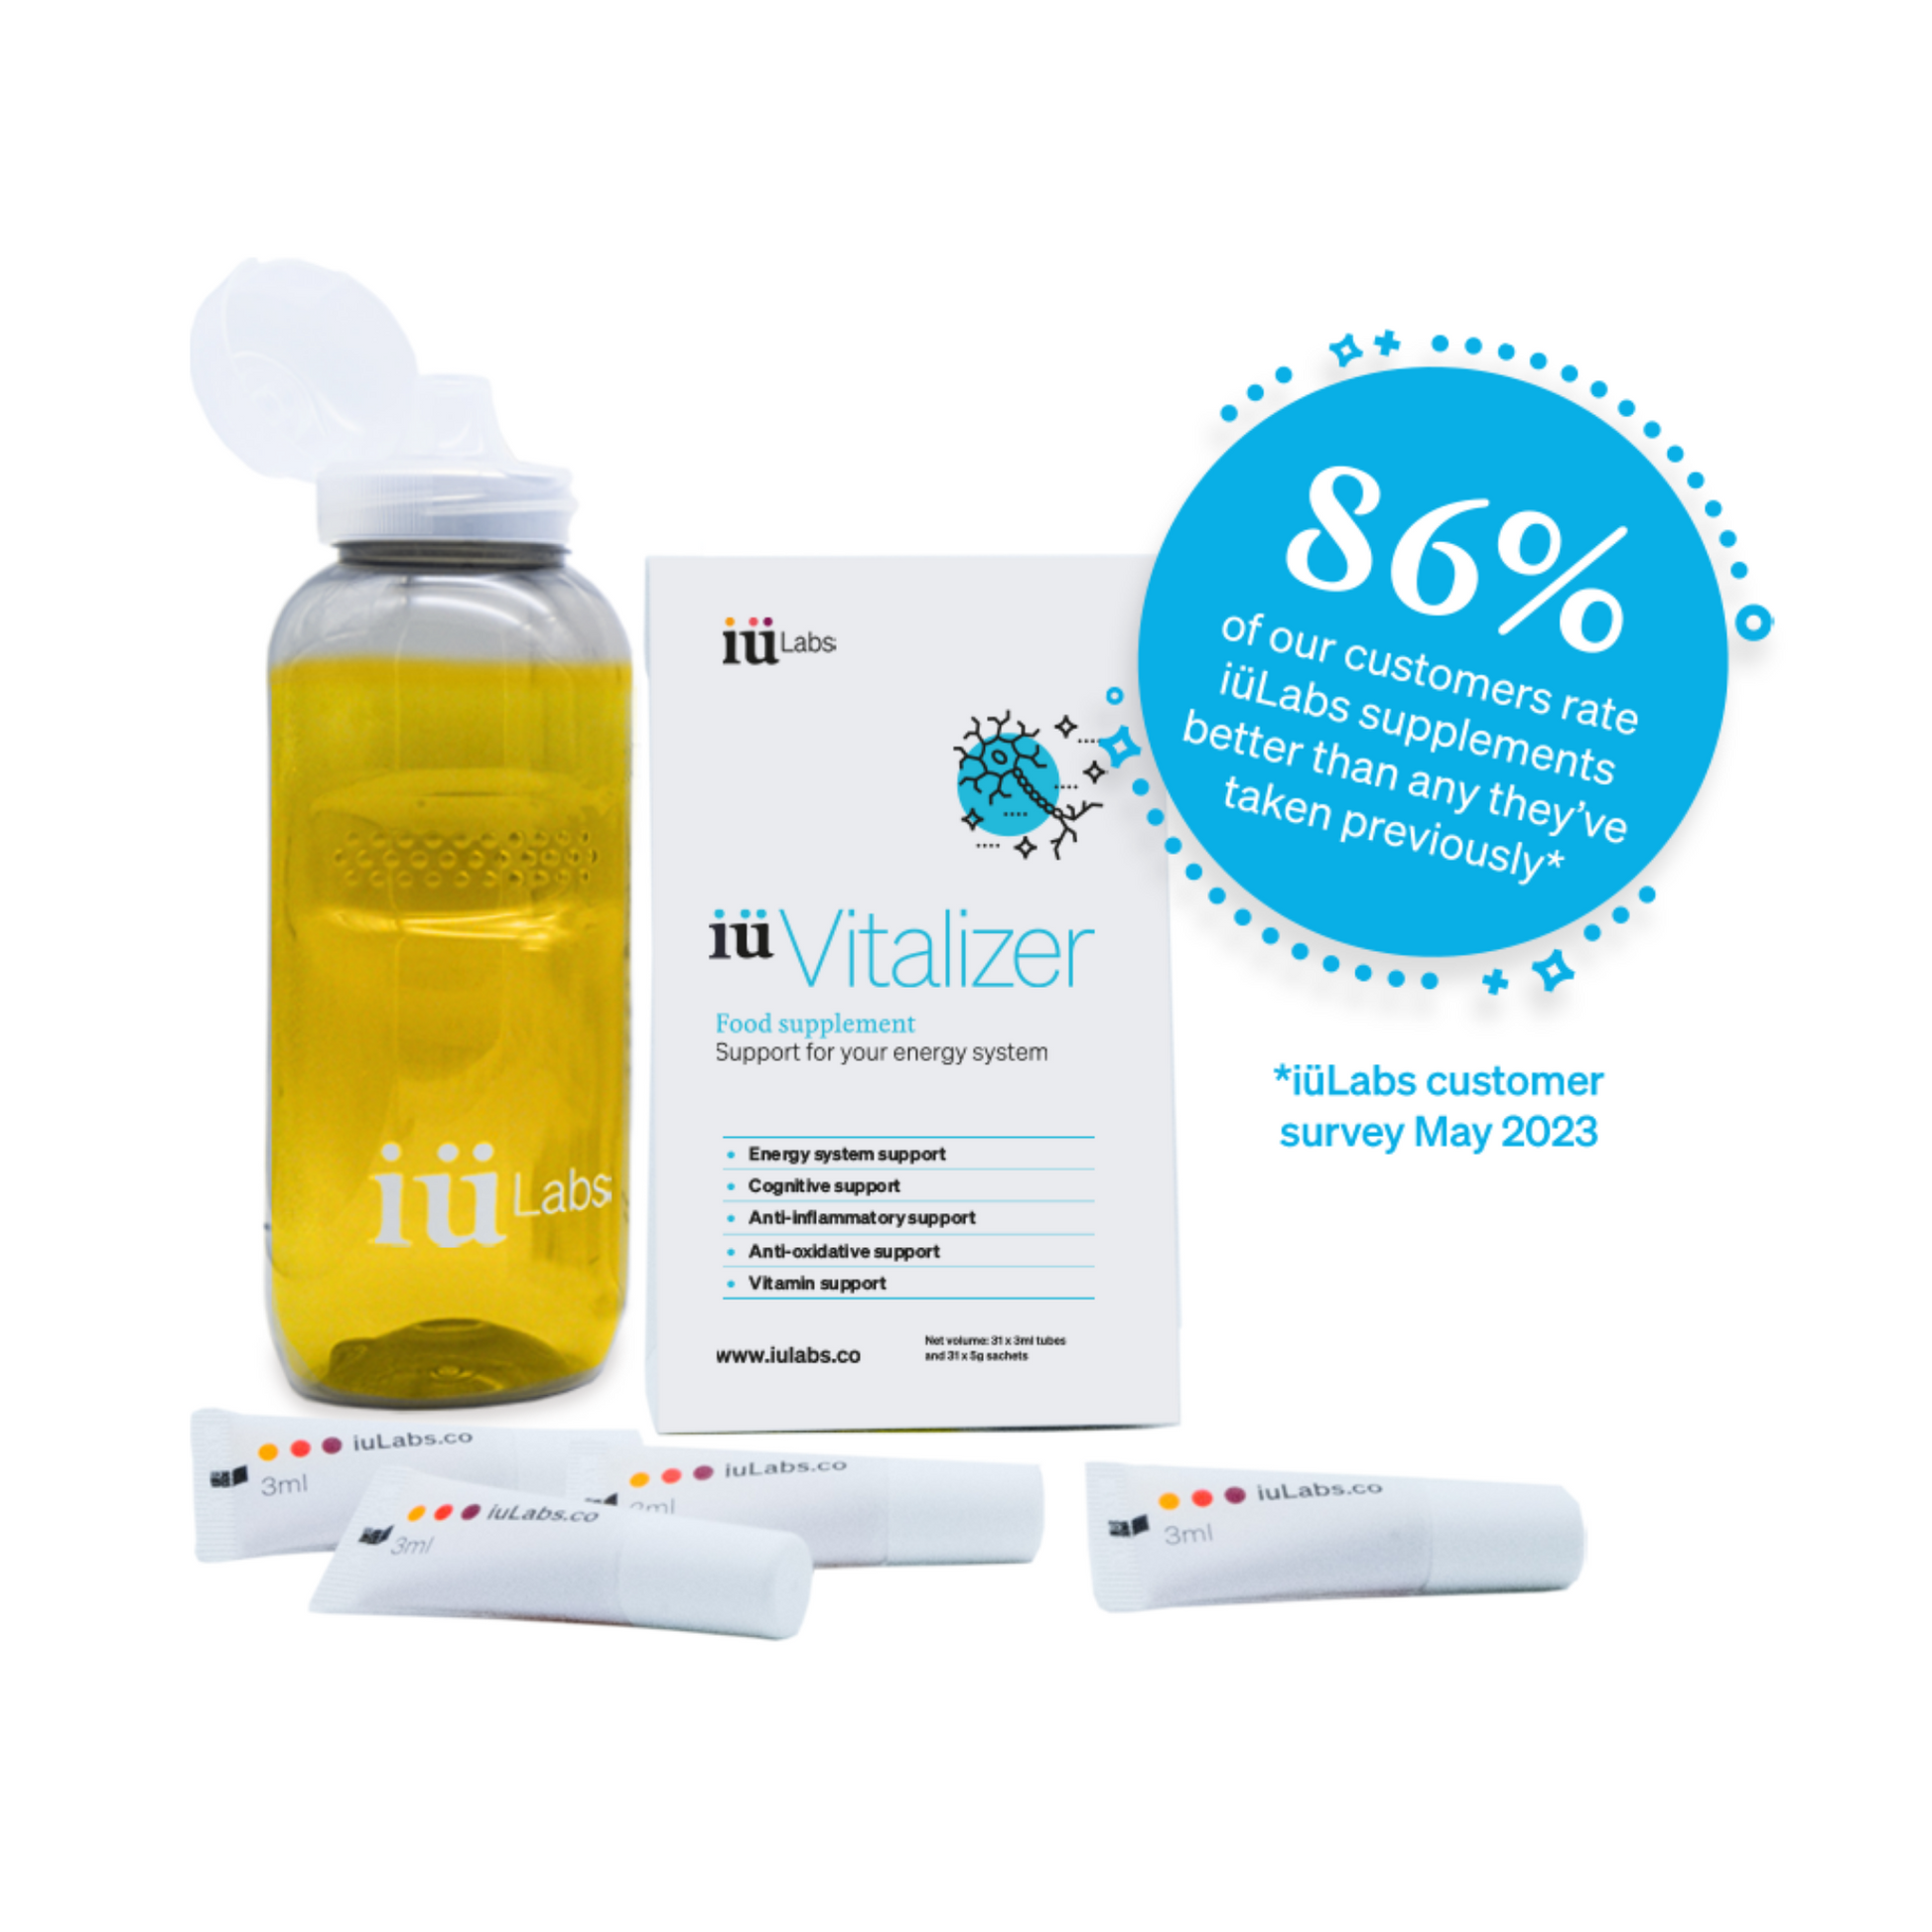 bottle and one month pack of iüVitalizer from iüLabs, energy support supplement, 86% of customers would recommend iüLabs